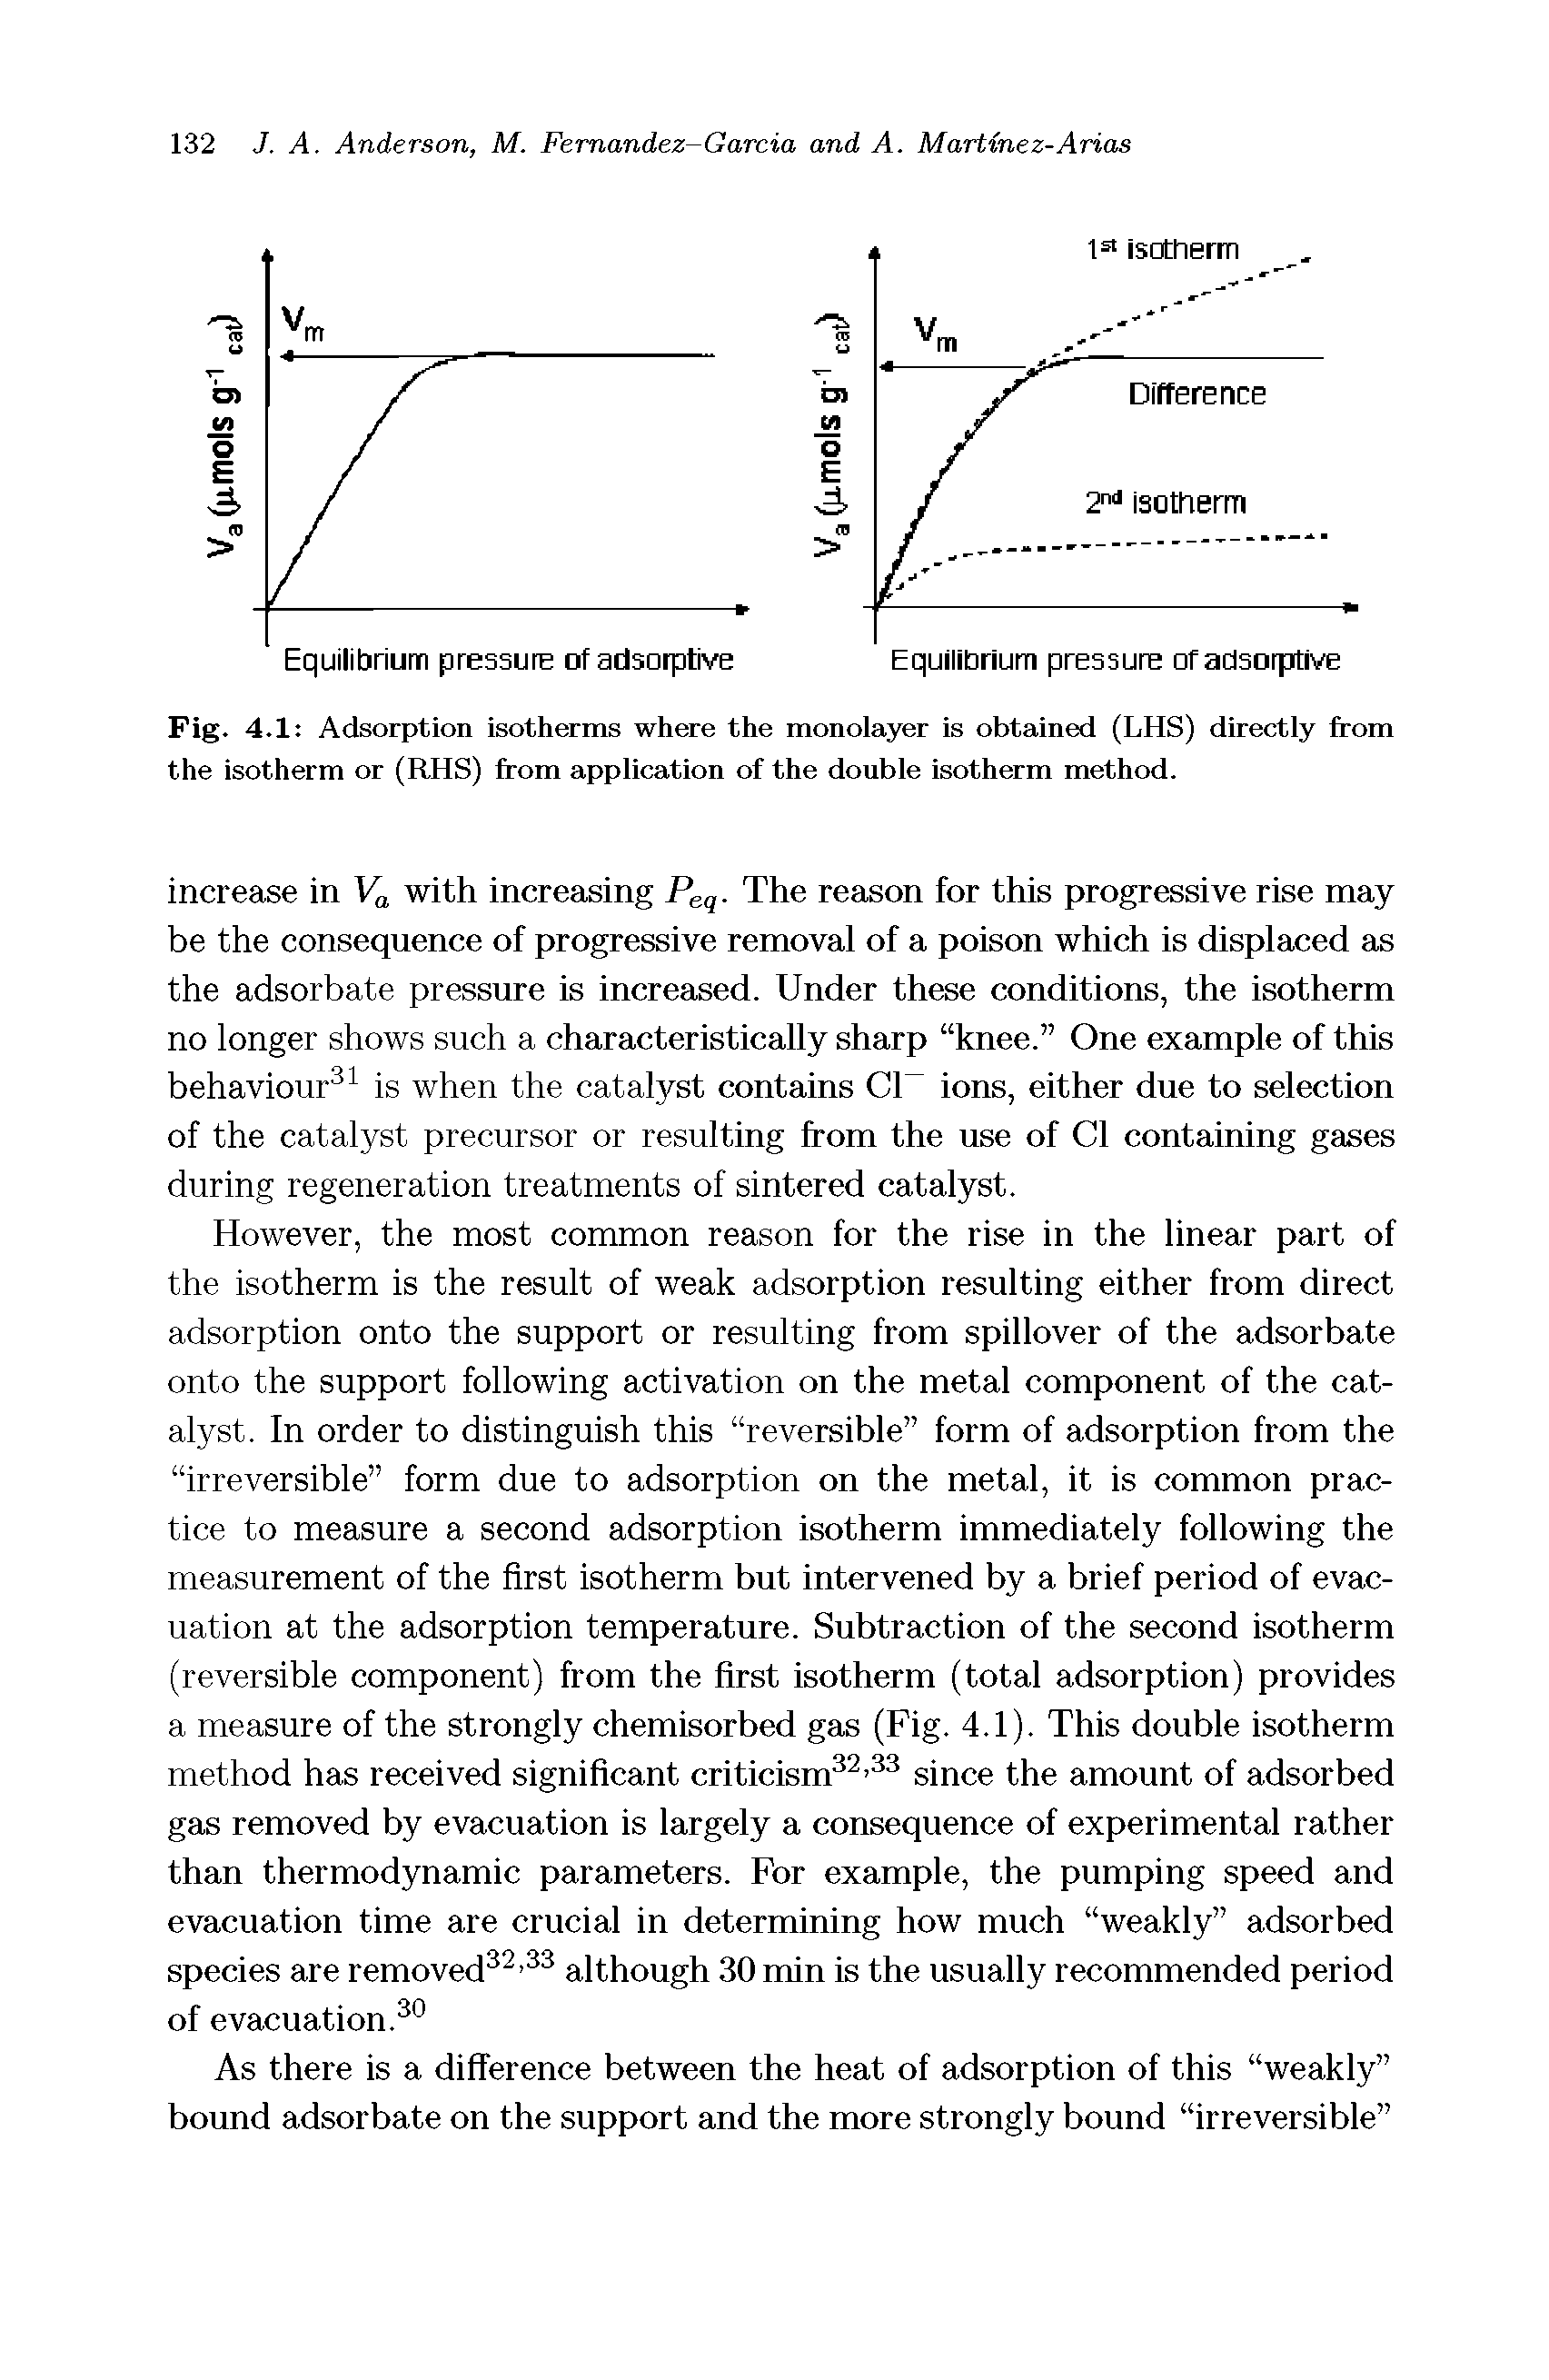 Fig. 4.1 Adsorption isotherms where the monolayer is obtained (LHS) directly from the isotherm or (RHS) from application of the double isotherm method.